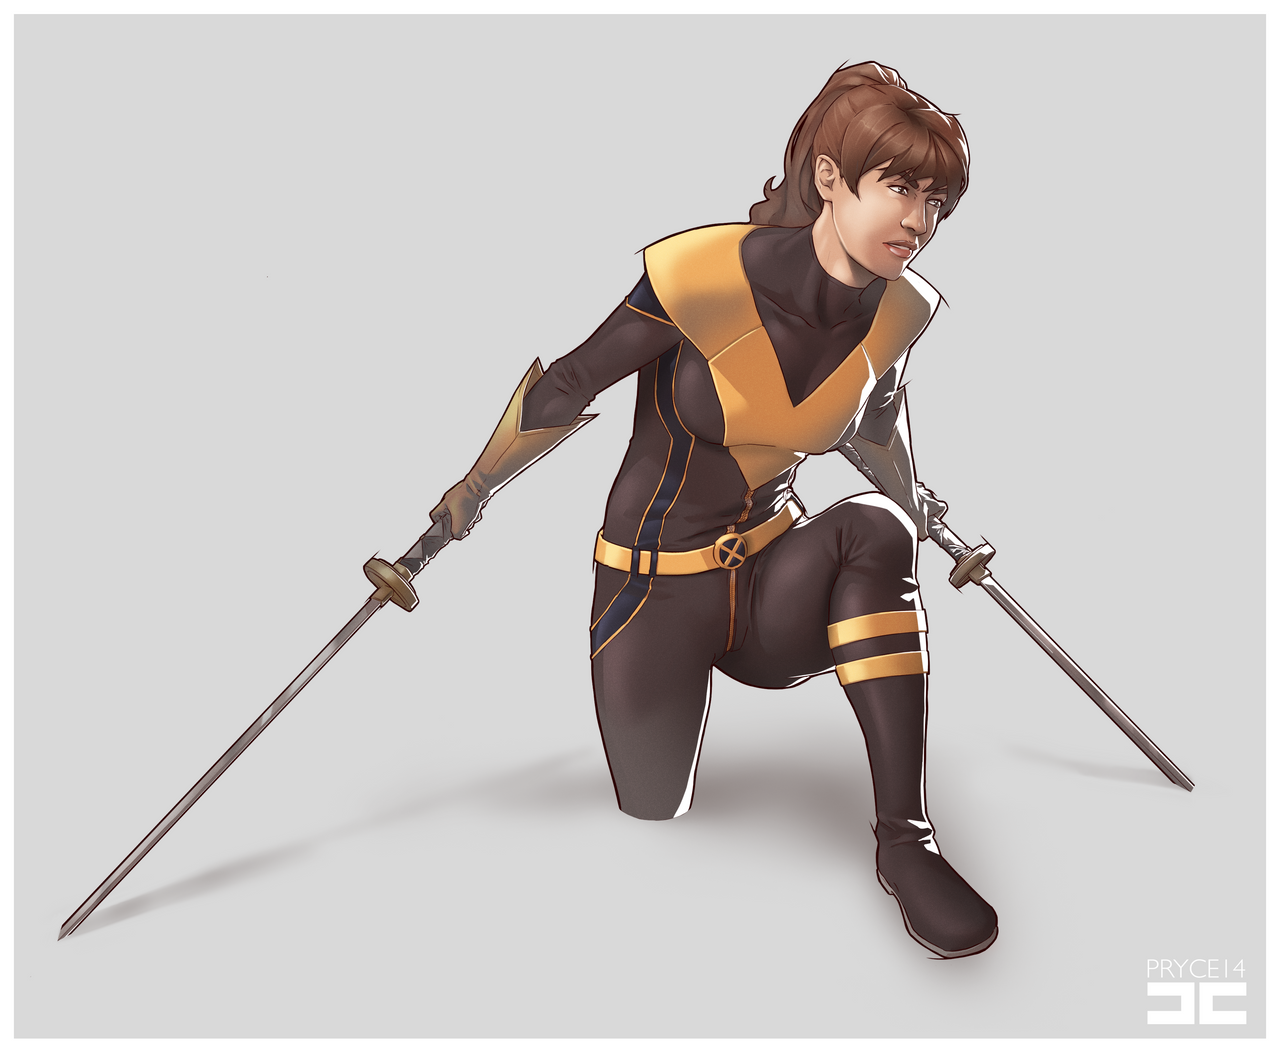 KITTY PRYDE